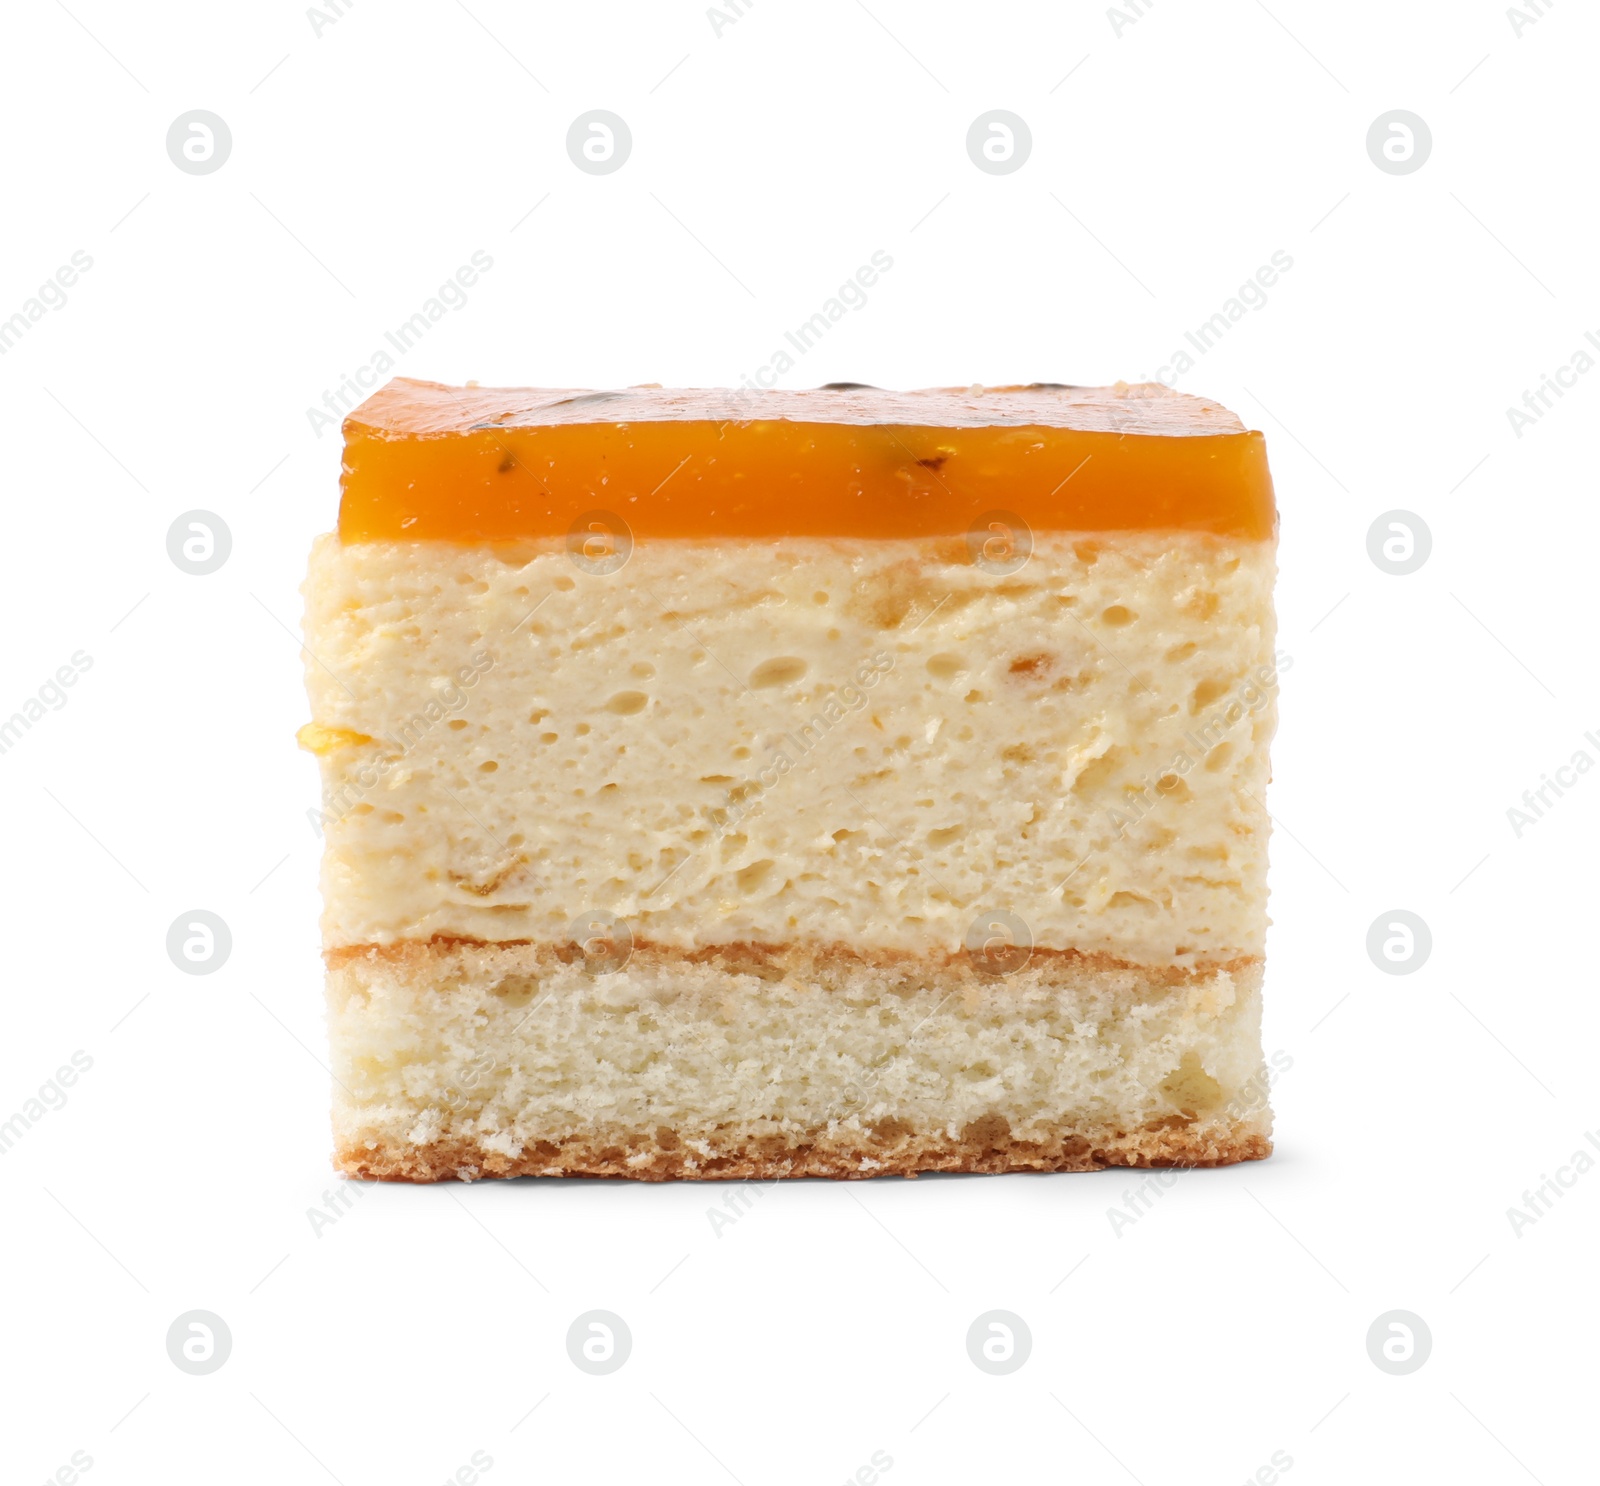 Photo of Piece of cheesecake with jelly on white background